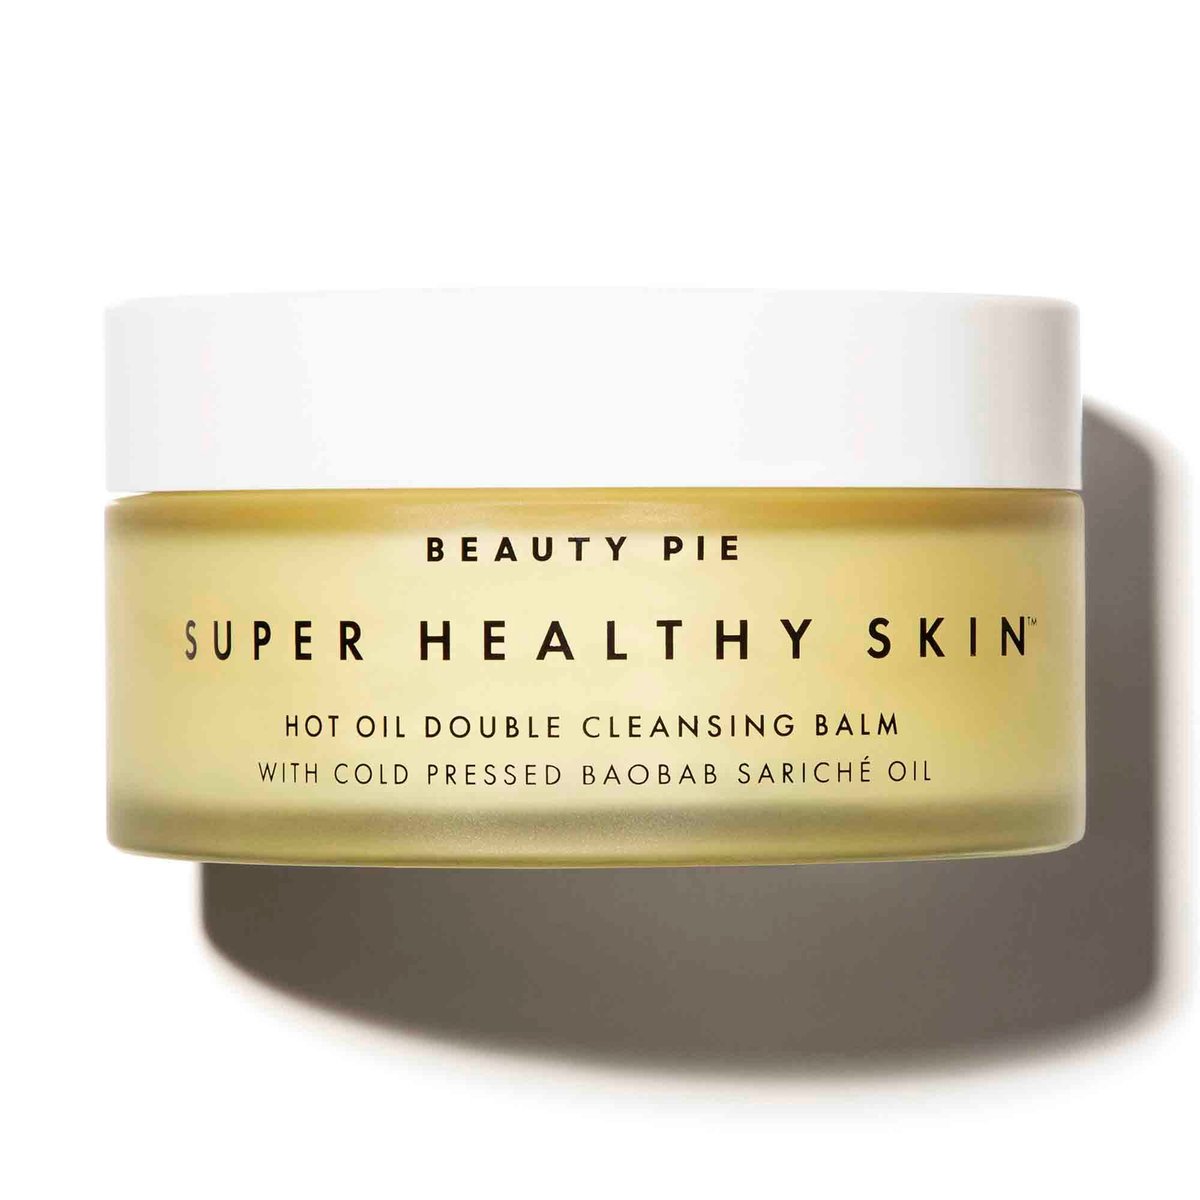 beautypie.com | SUPER HEALTHY SKIN™  HOT OIL DOUBLE CLEANSING BALM